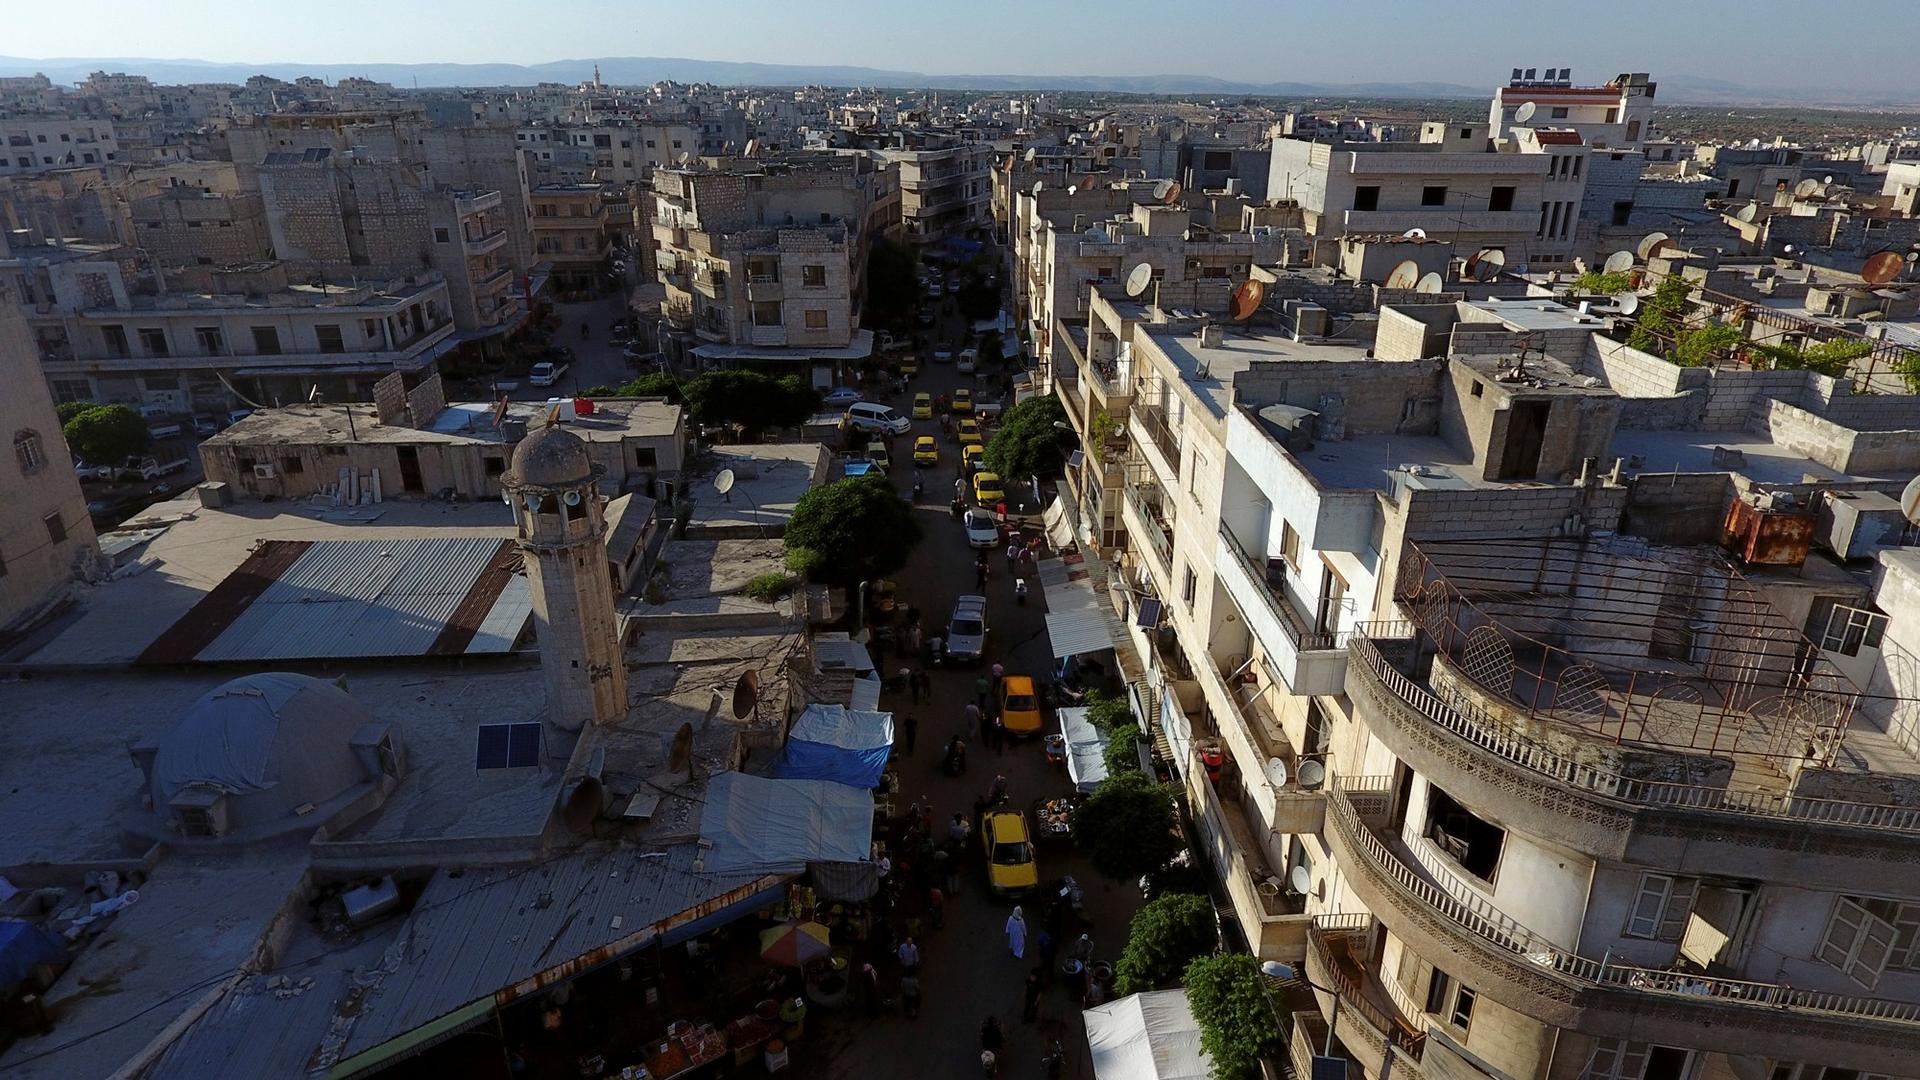 A street filled with cars in the rebel-held Idlib city, Syria, shown from above on June 8, 2017. 